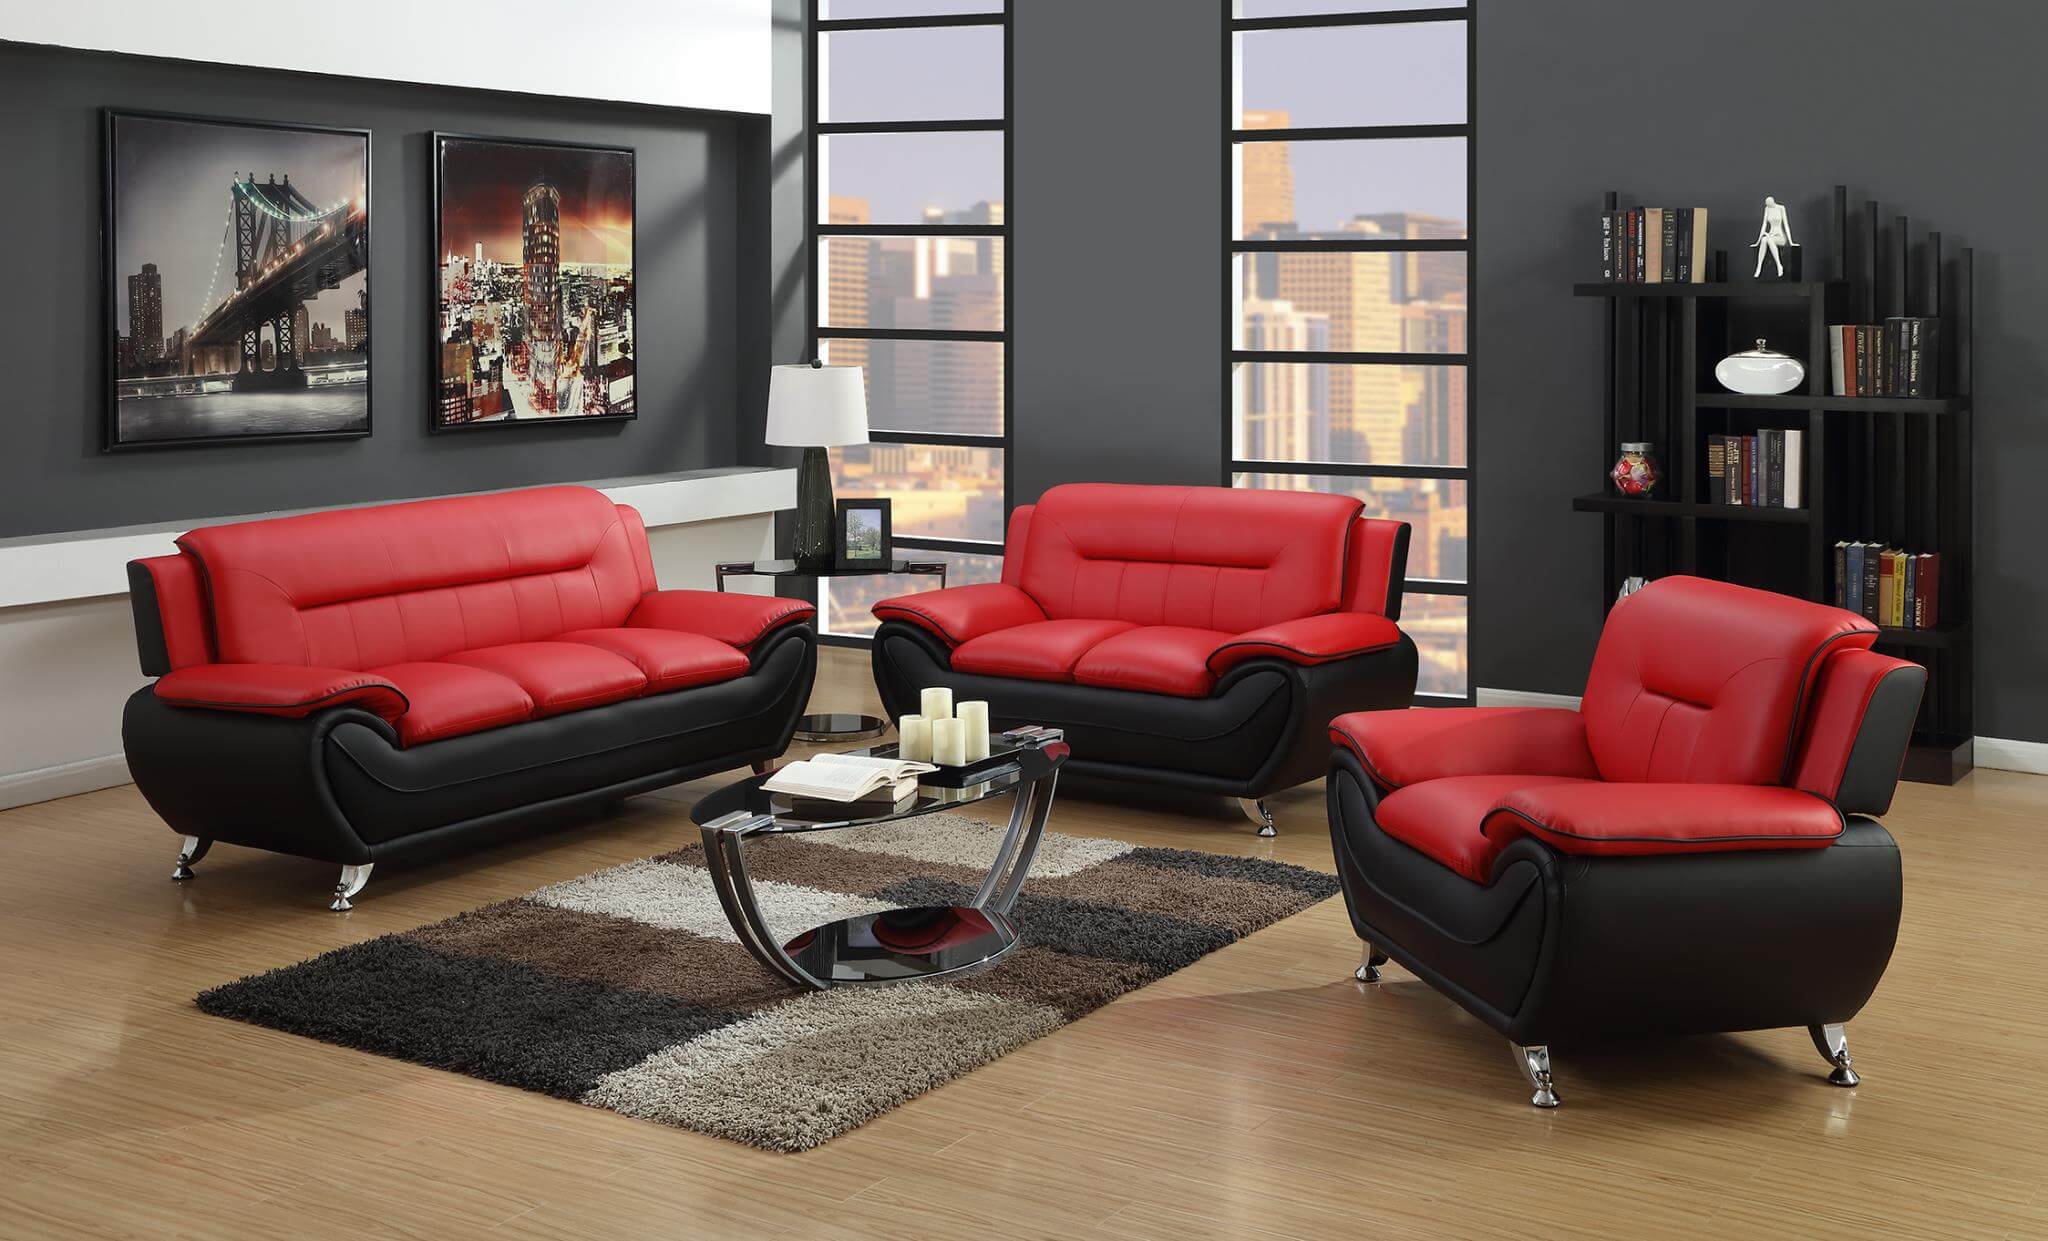 Modern red and black living room